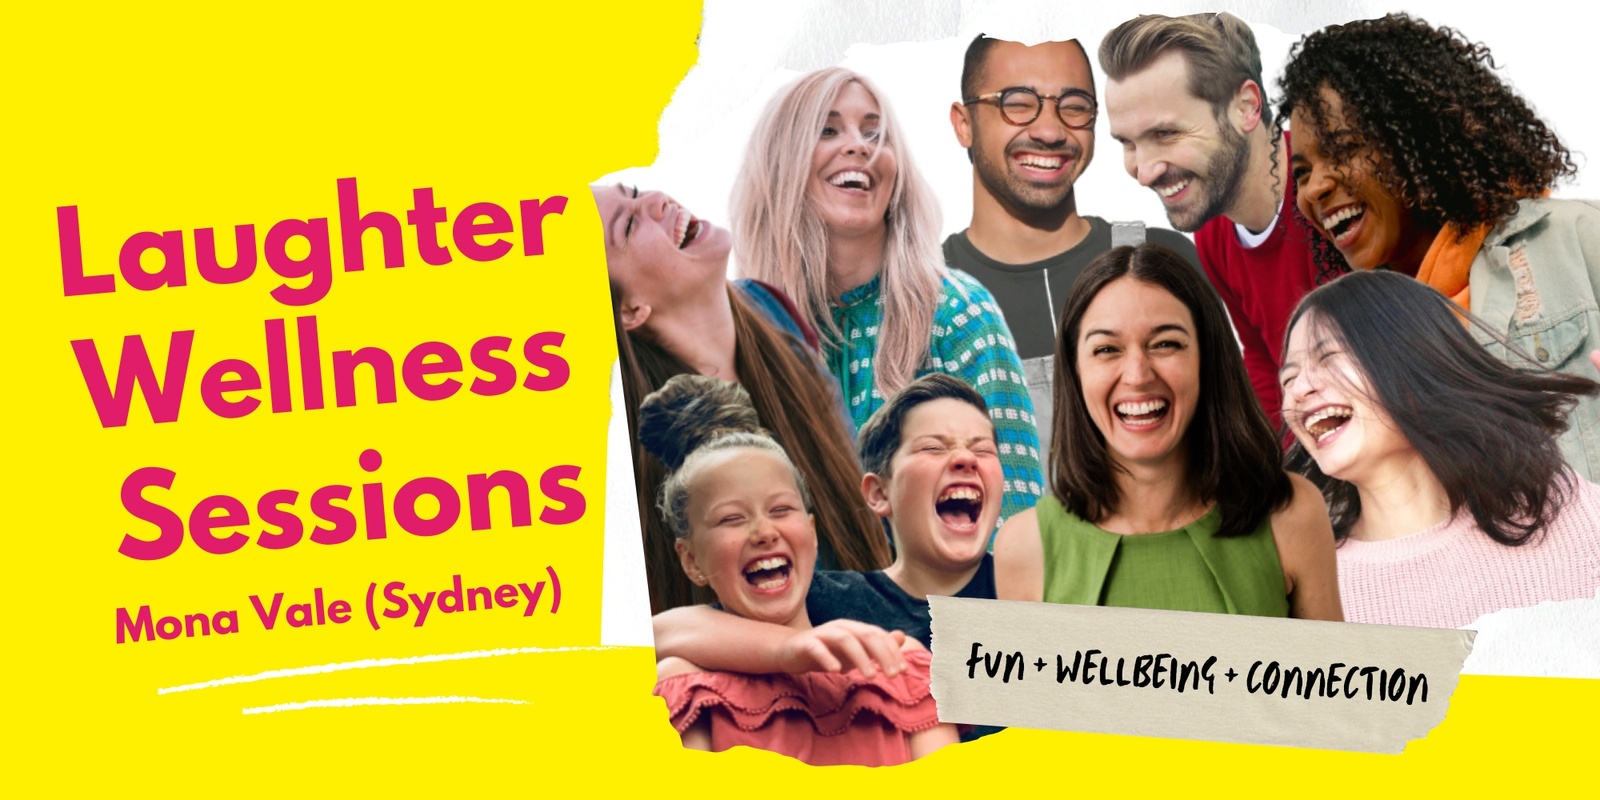 Banner image for Laughter Wellness Sydney - FUN, WELLBEING, CONNECTION